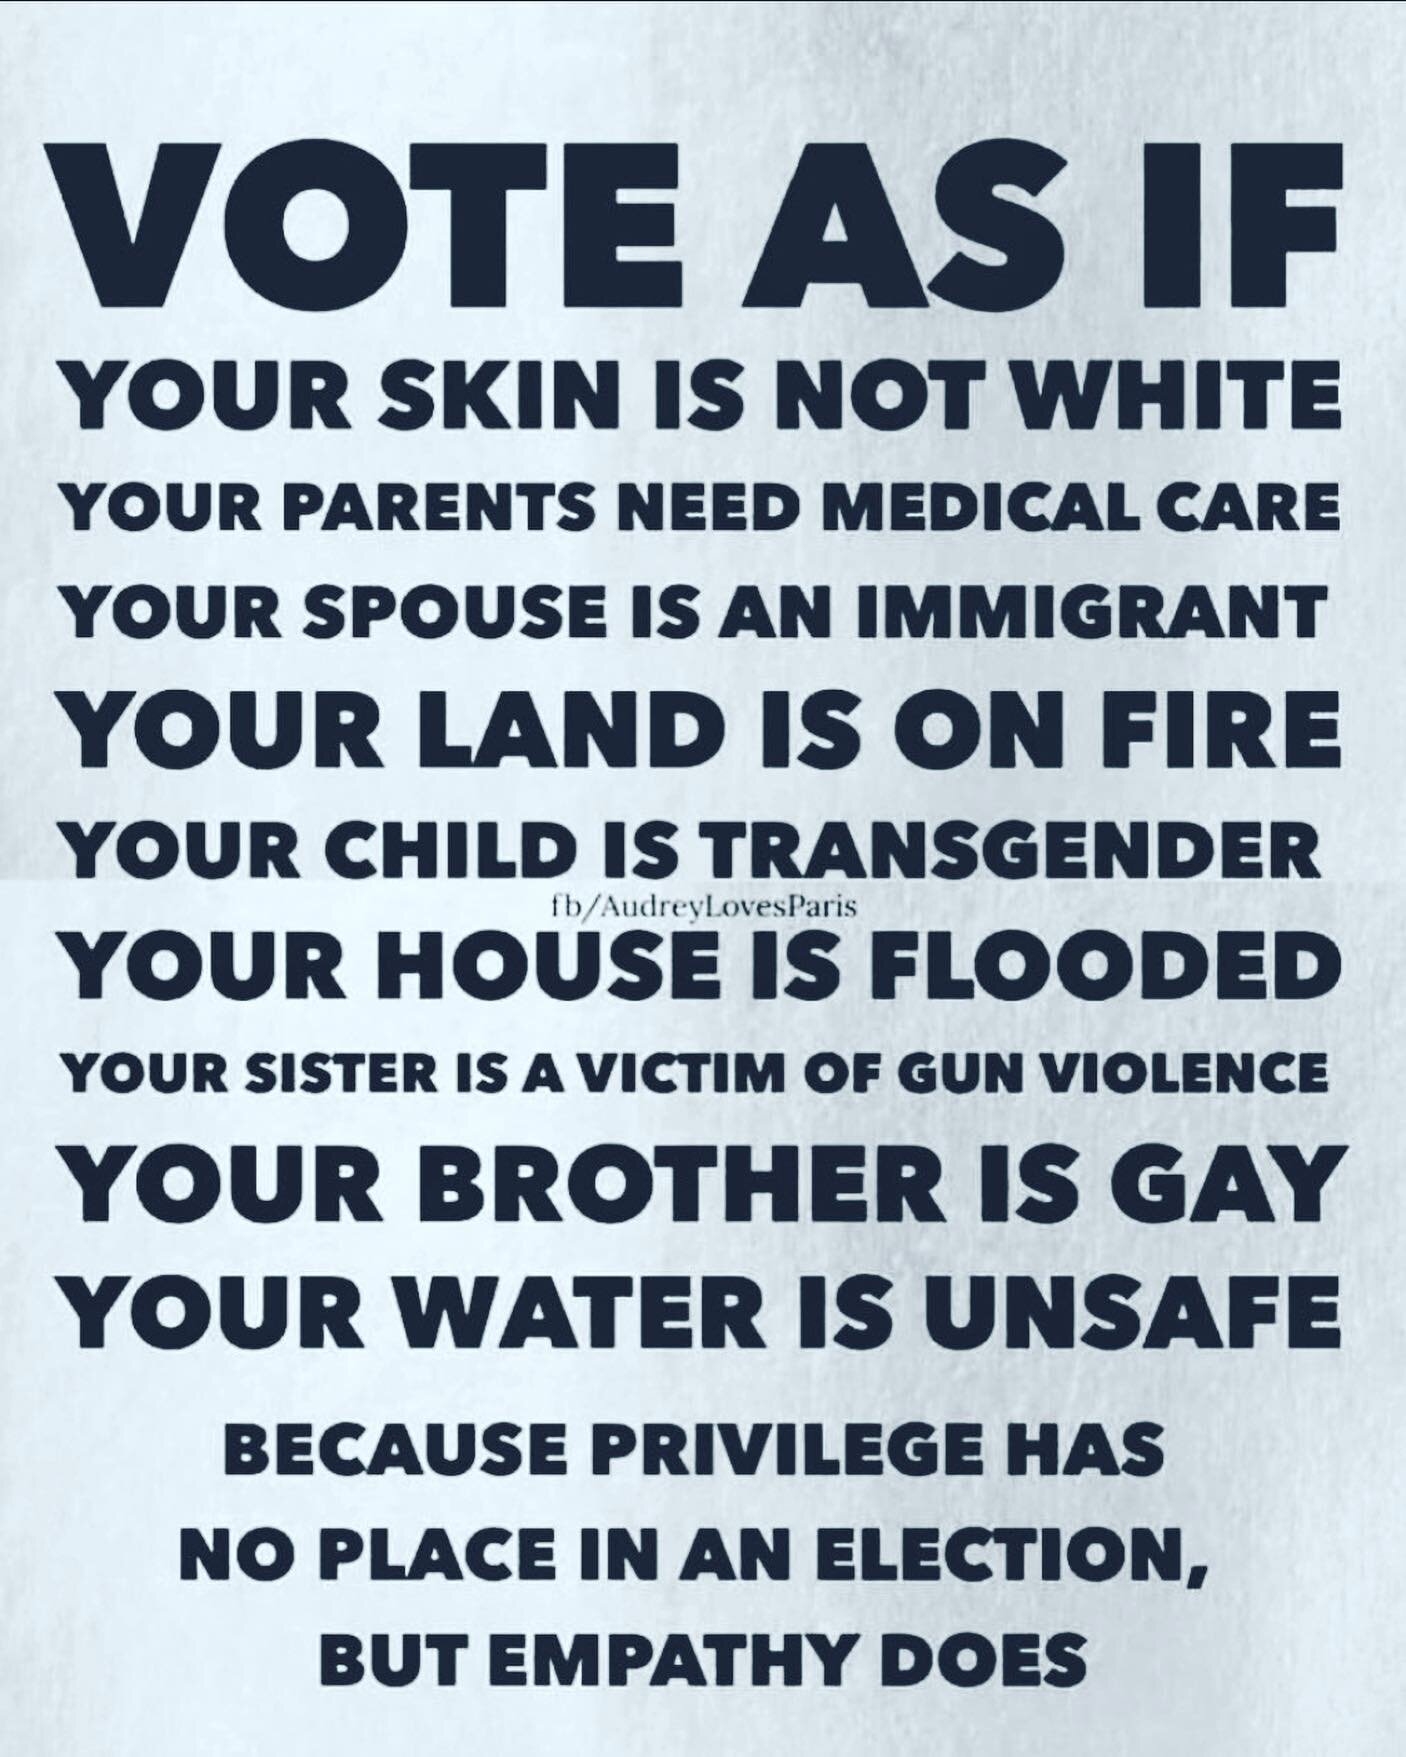 Vote like your life depends on it.
@feministhood